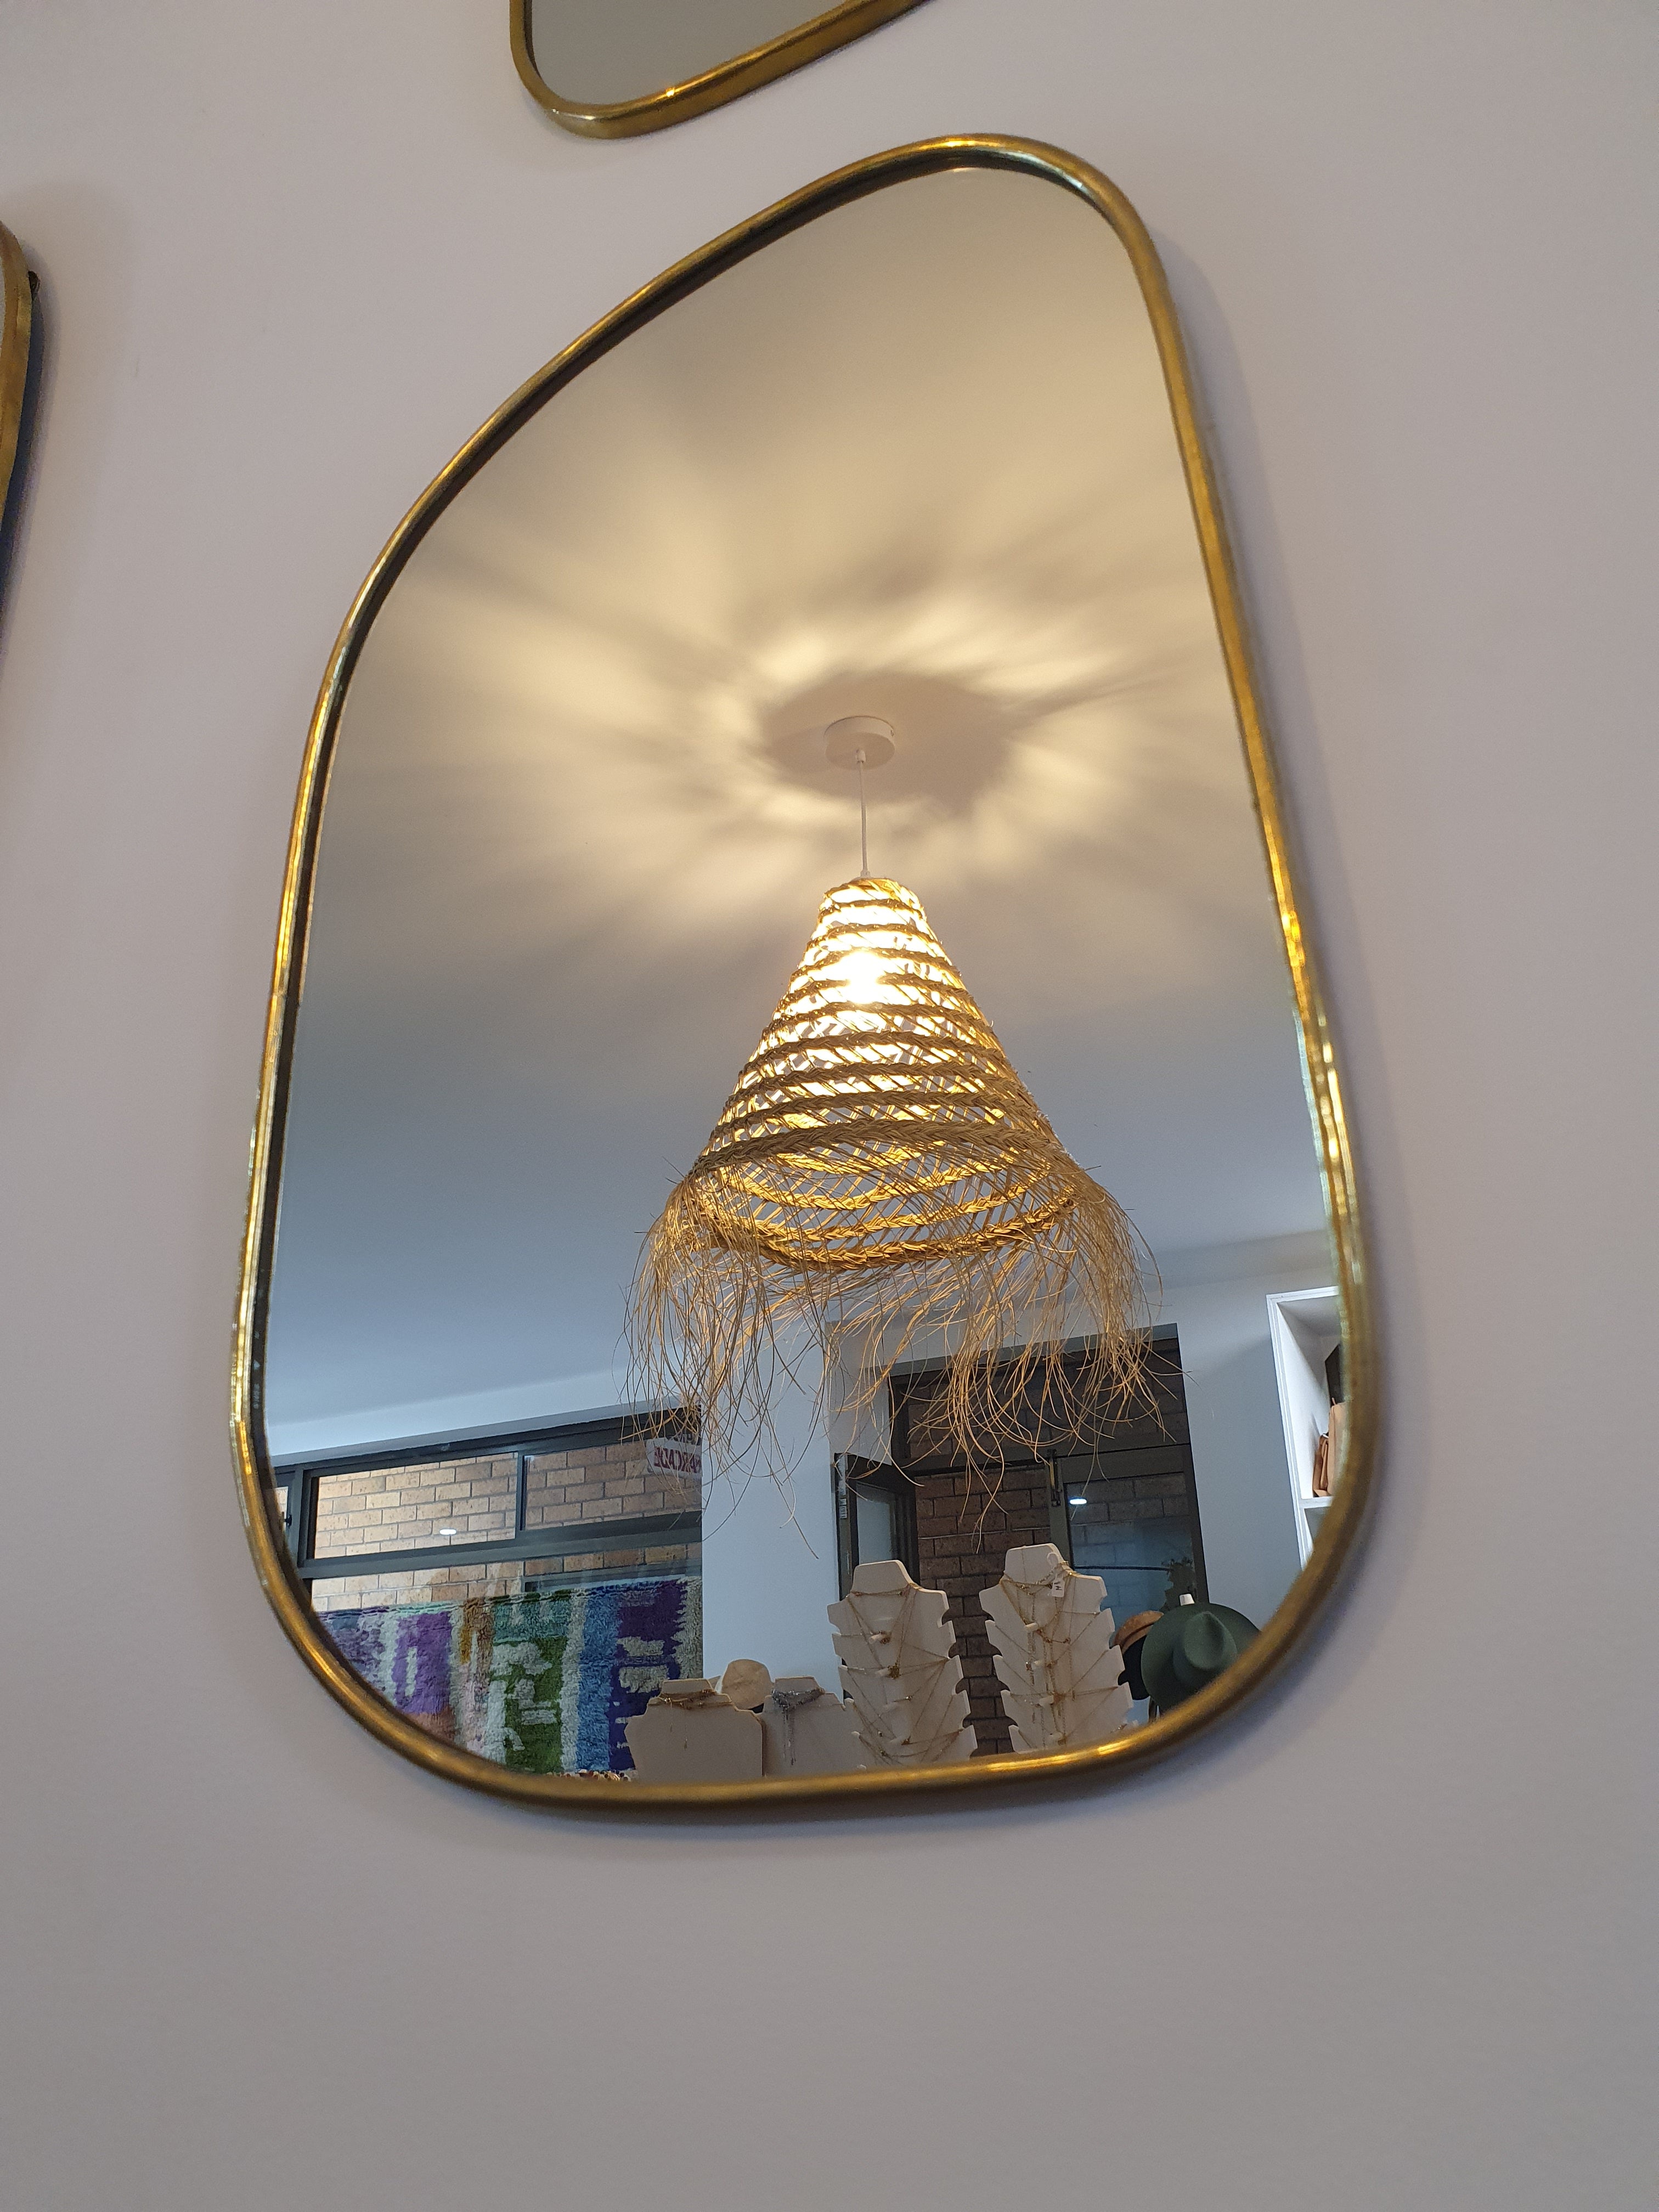 oblong shaped, brass lined decorative mirror